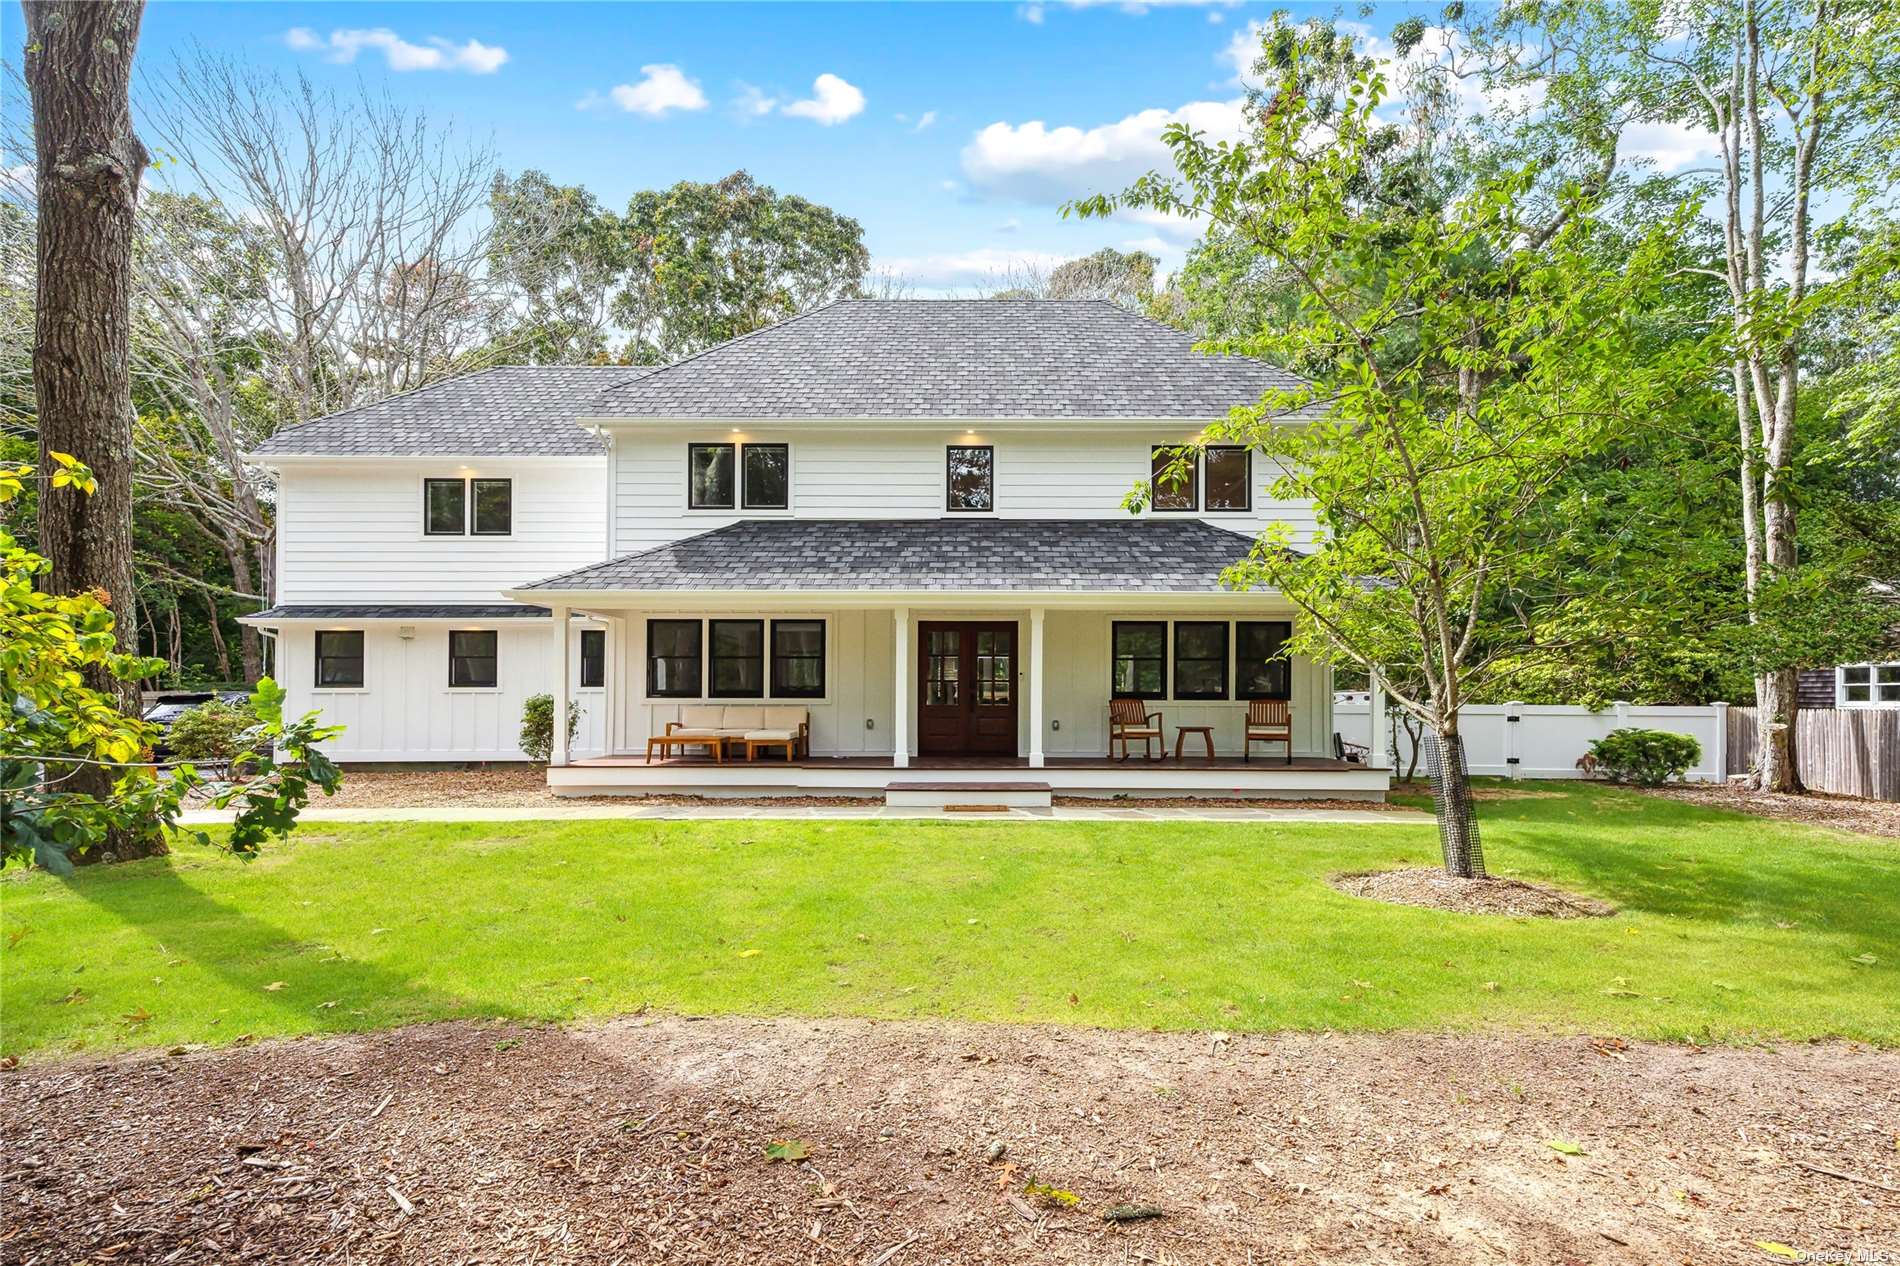 House in Westhampton - Jagger  Suffolk, NY 11977